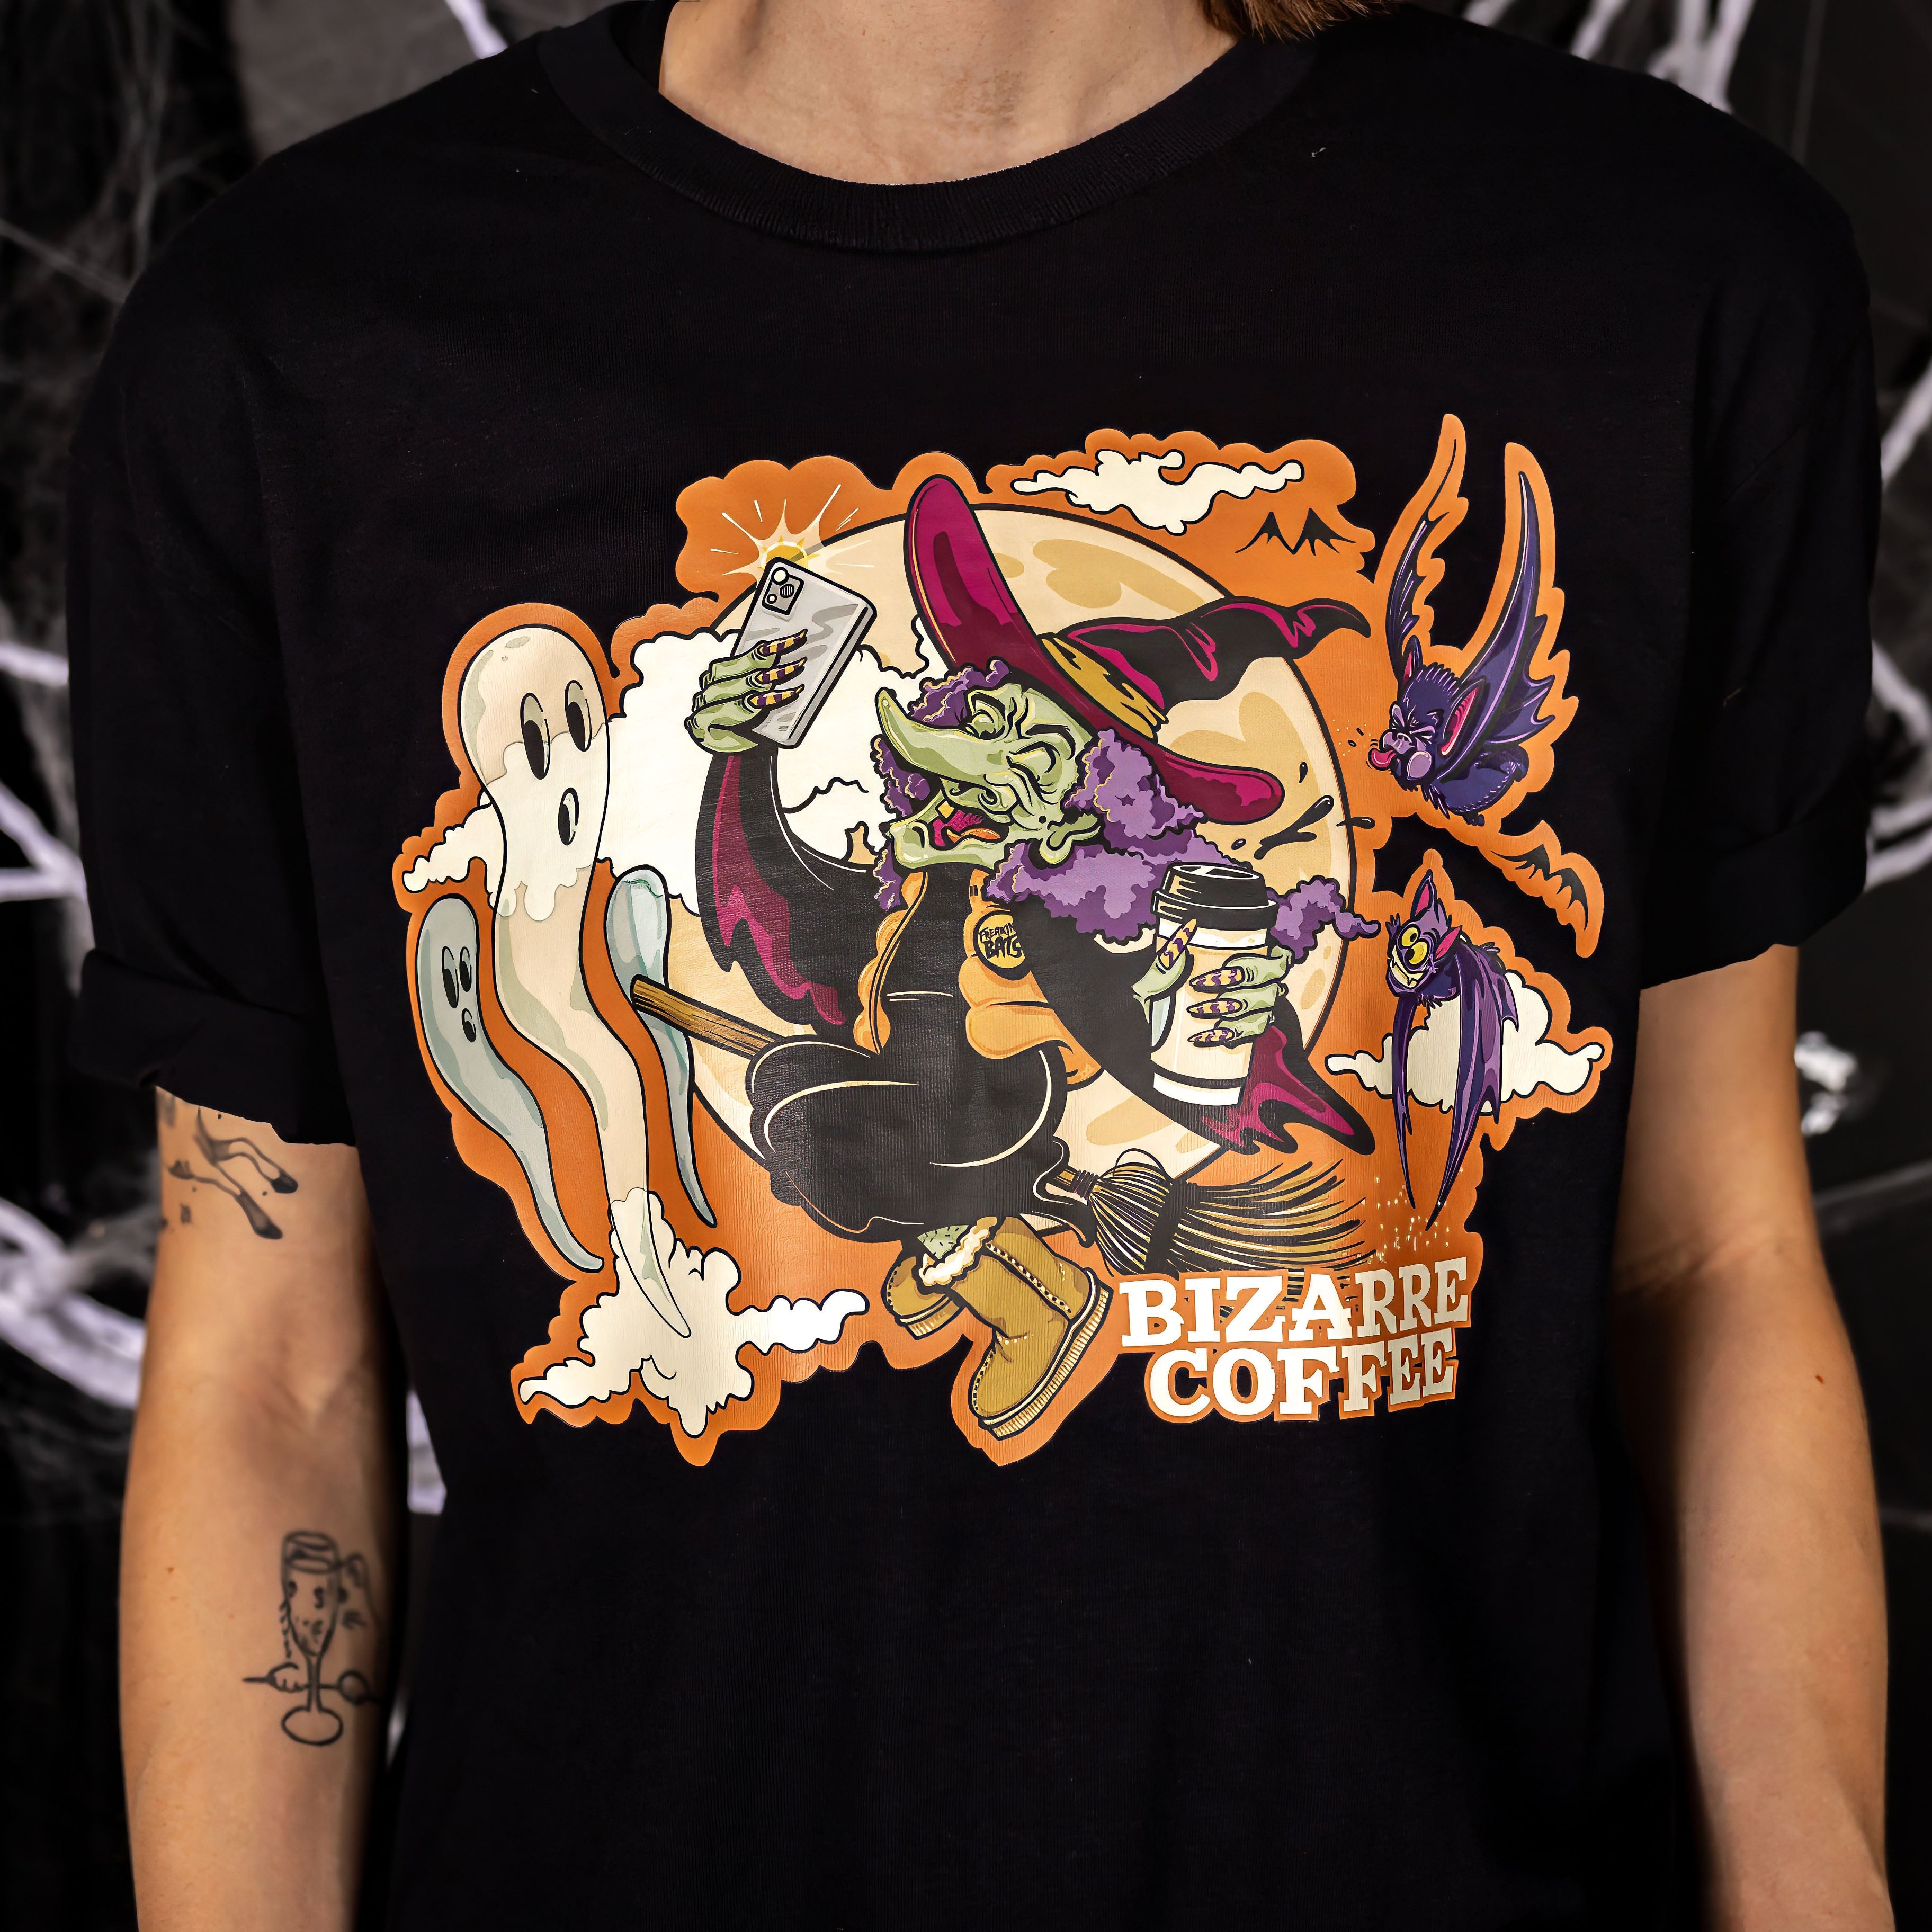 A t-shirt with a custom design featuring a witch on a broom holding a coffee cup.